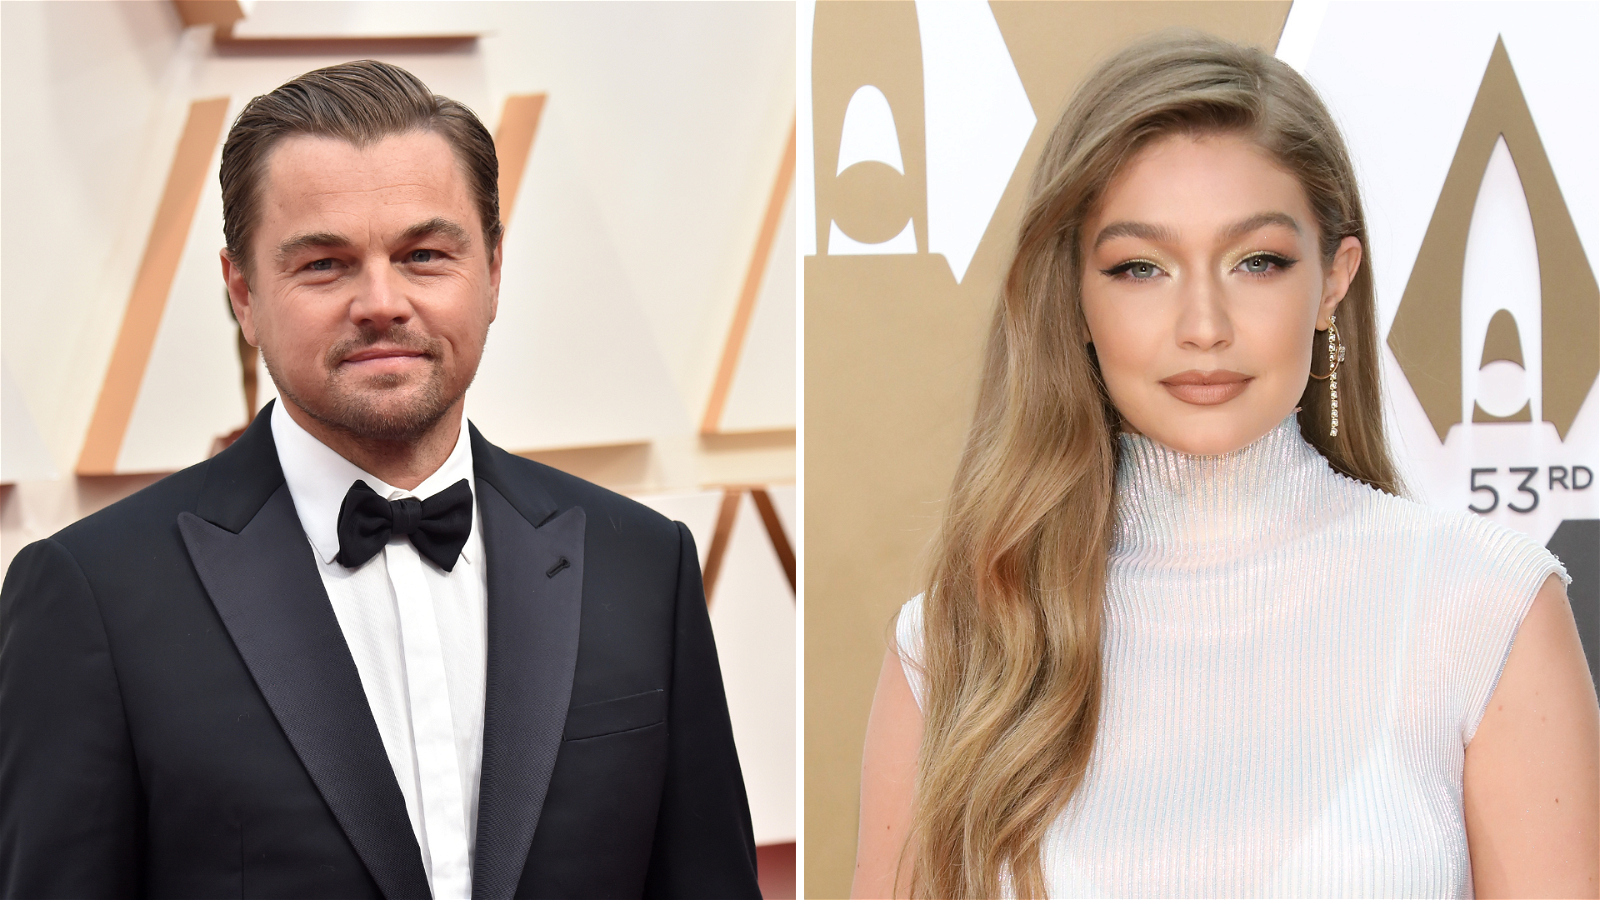 Gigi Hadid and DiCaprio are reportedly dating